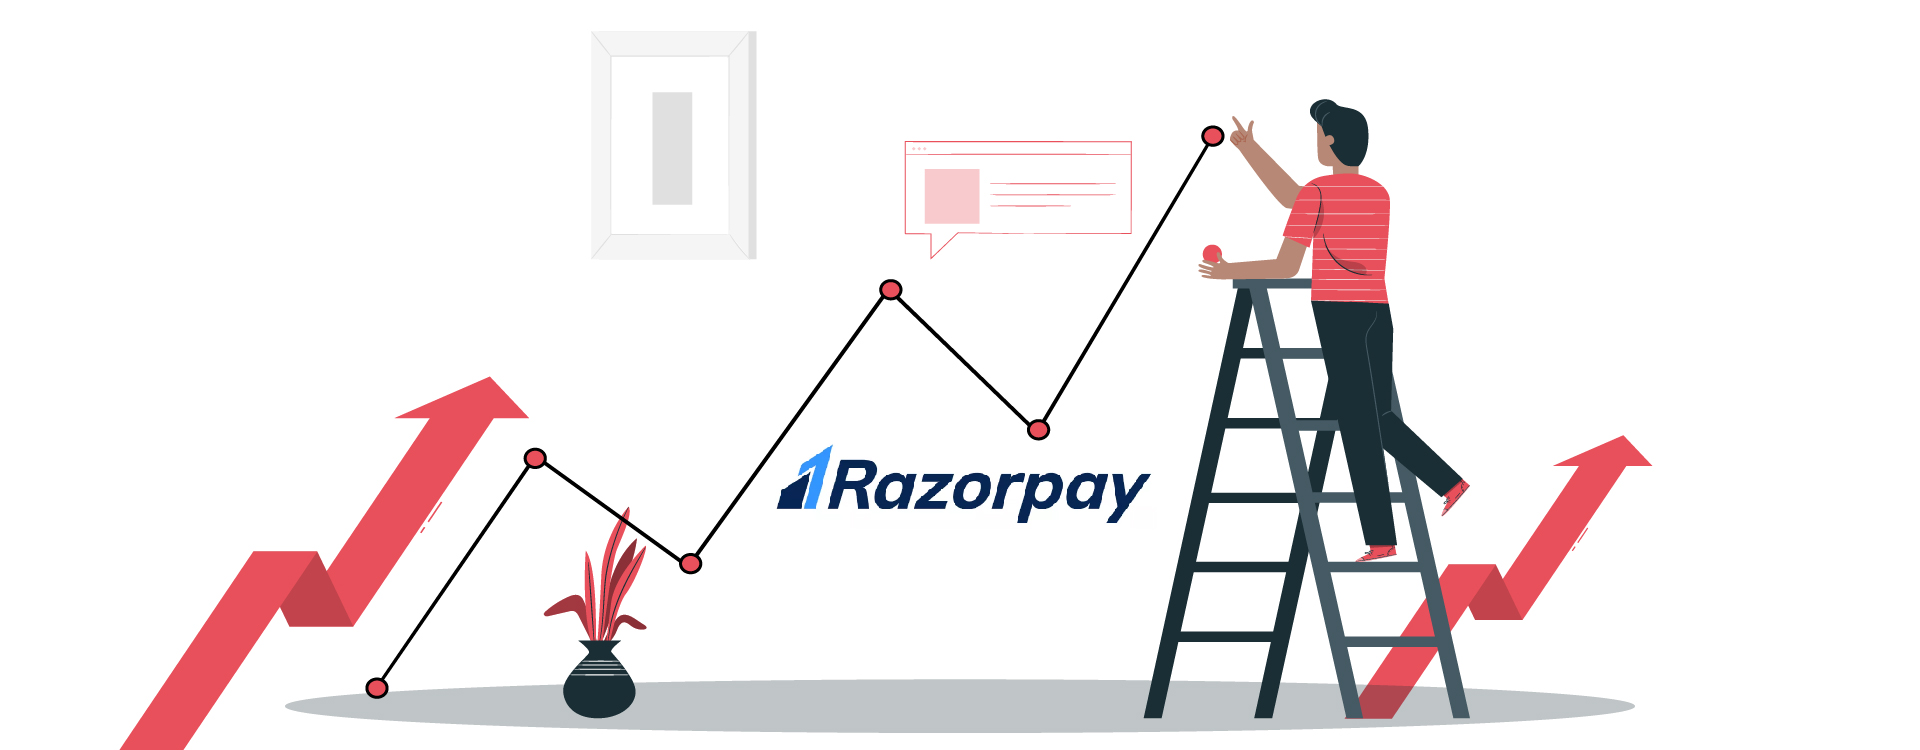 Razorpay Payment Gateway Has Expansion Plans for 2021